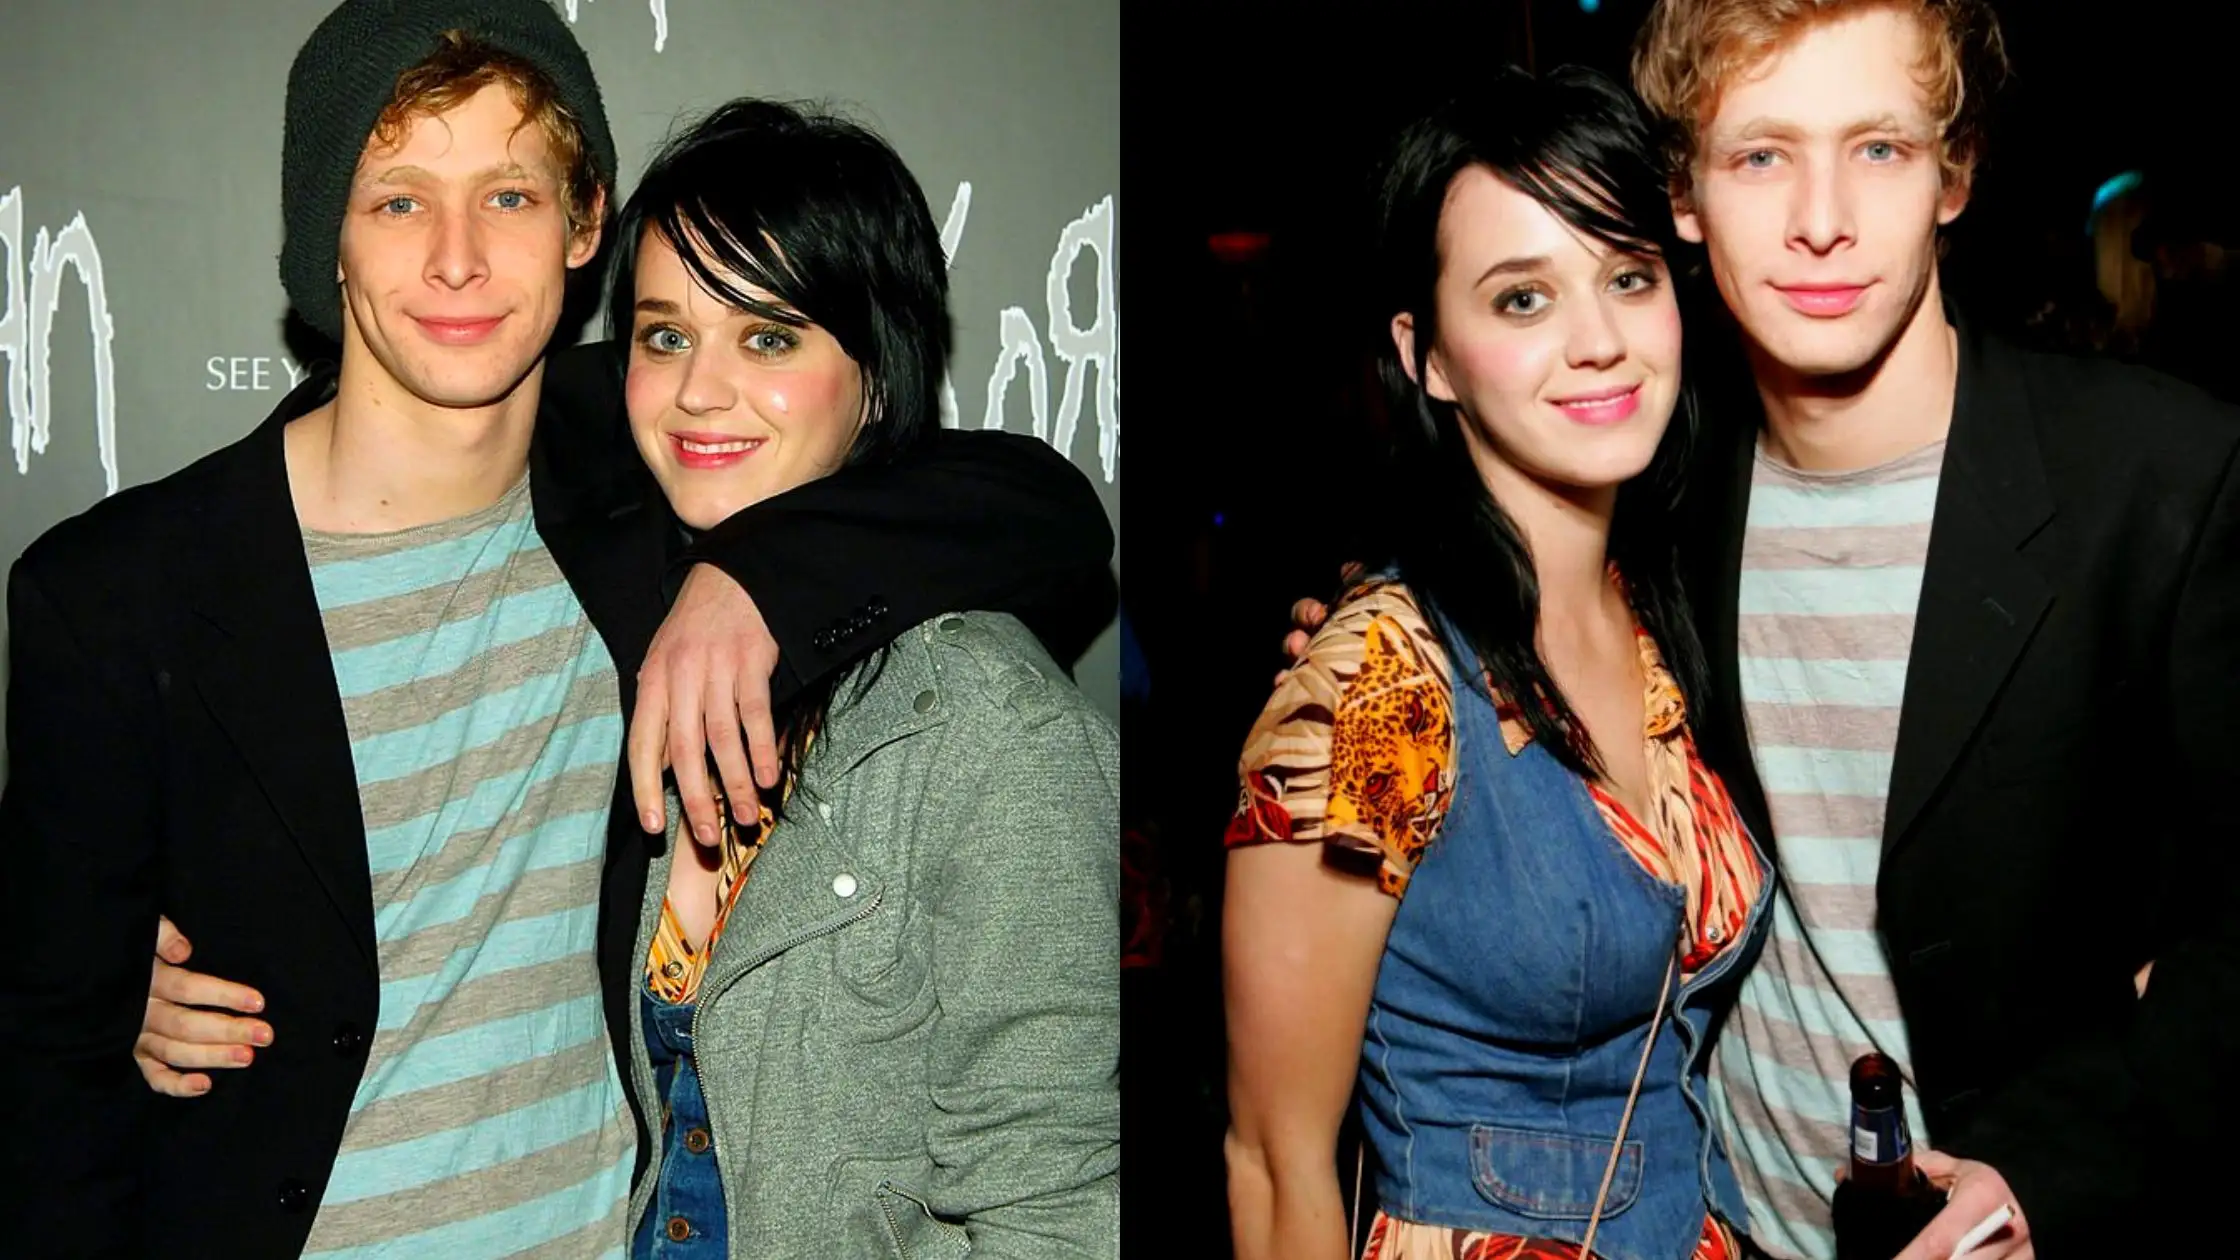 Johnny Lewis Death His Relationship With Katy Perry, His Net Worth, Personal Life